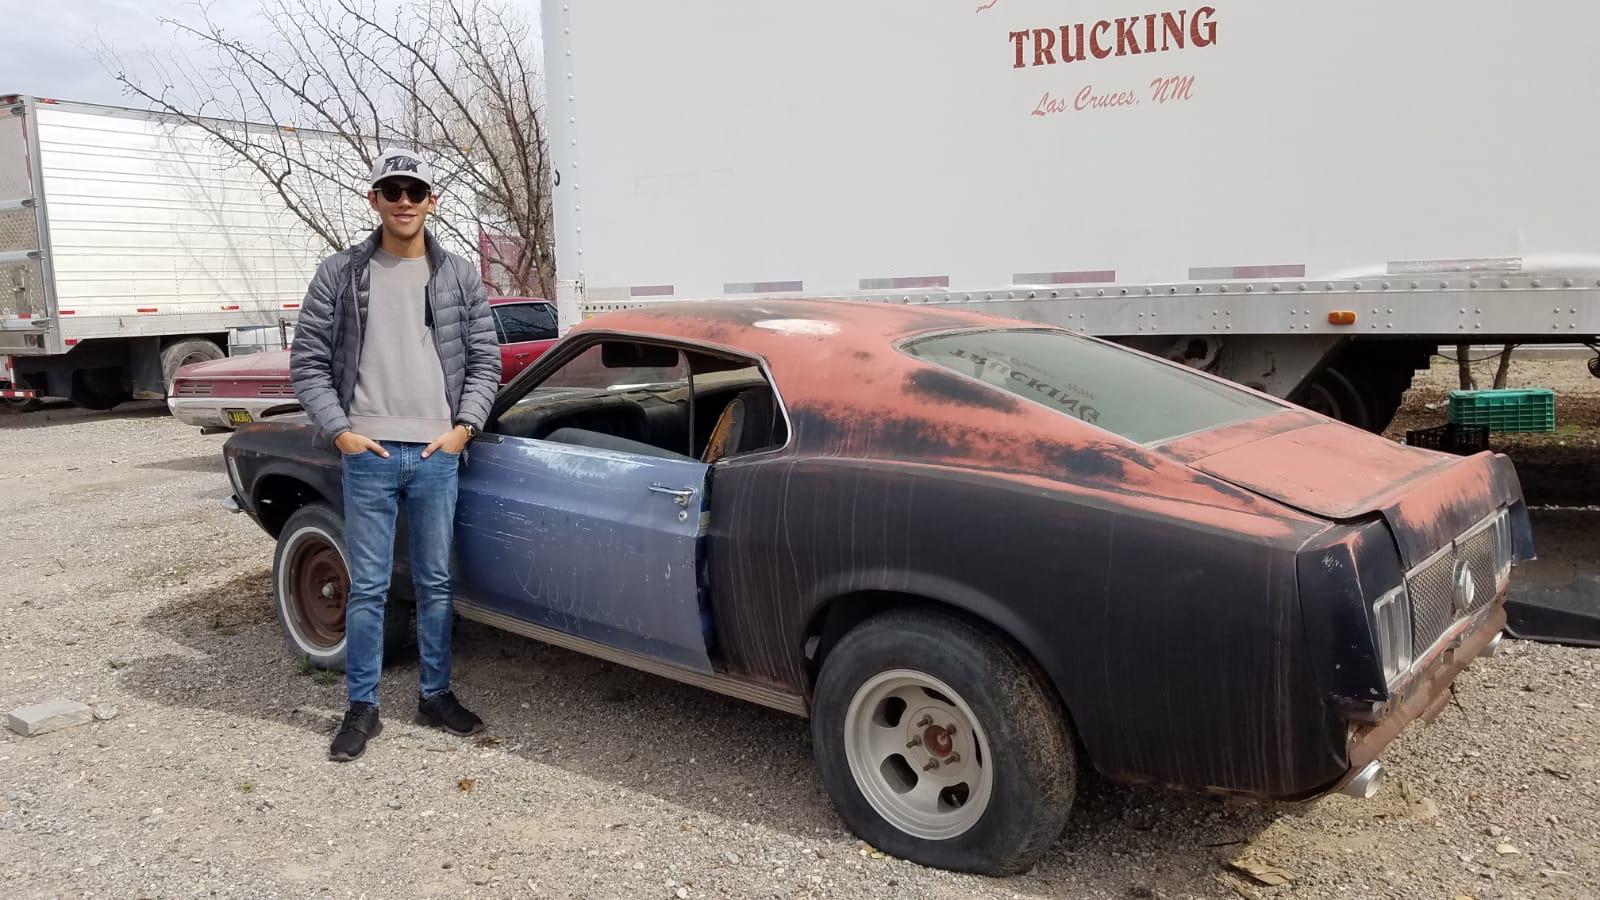 After 10 years of my dad selling his 1970 Mach 1, he bought one again! This project will take around 2 years. The one we used to have was grabber blue with the 351 4V V8, I’m super excited! (Already posted this on another subreddit but still wanted to share with everyone)